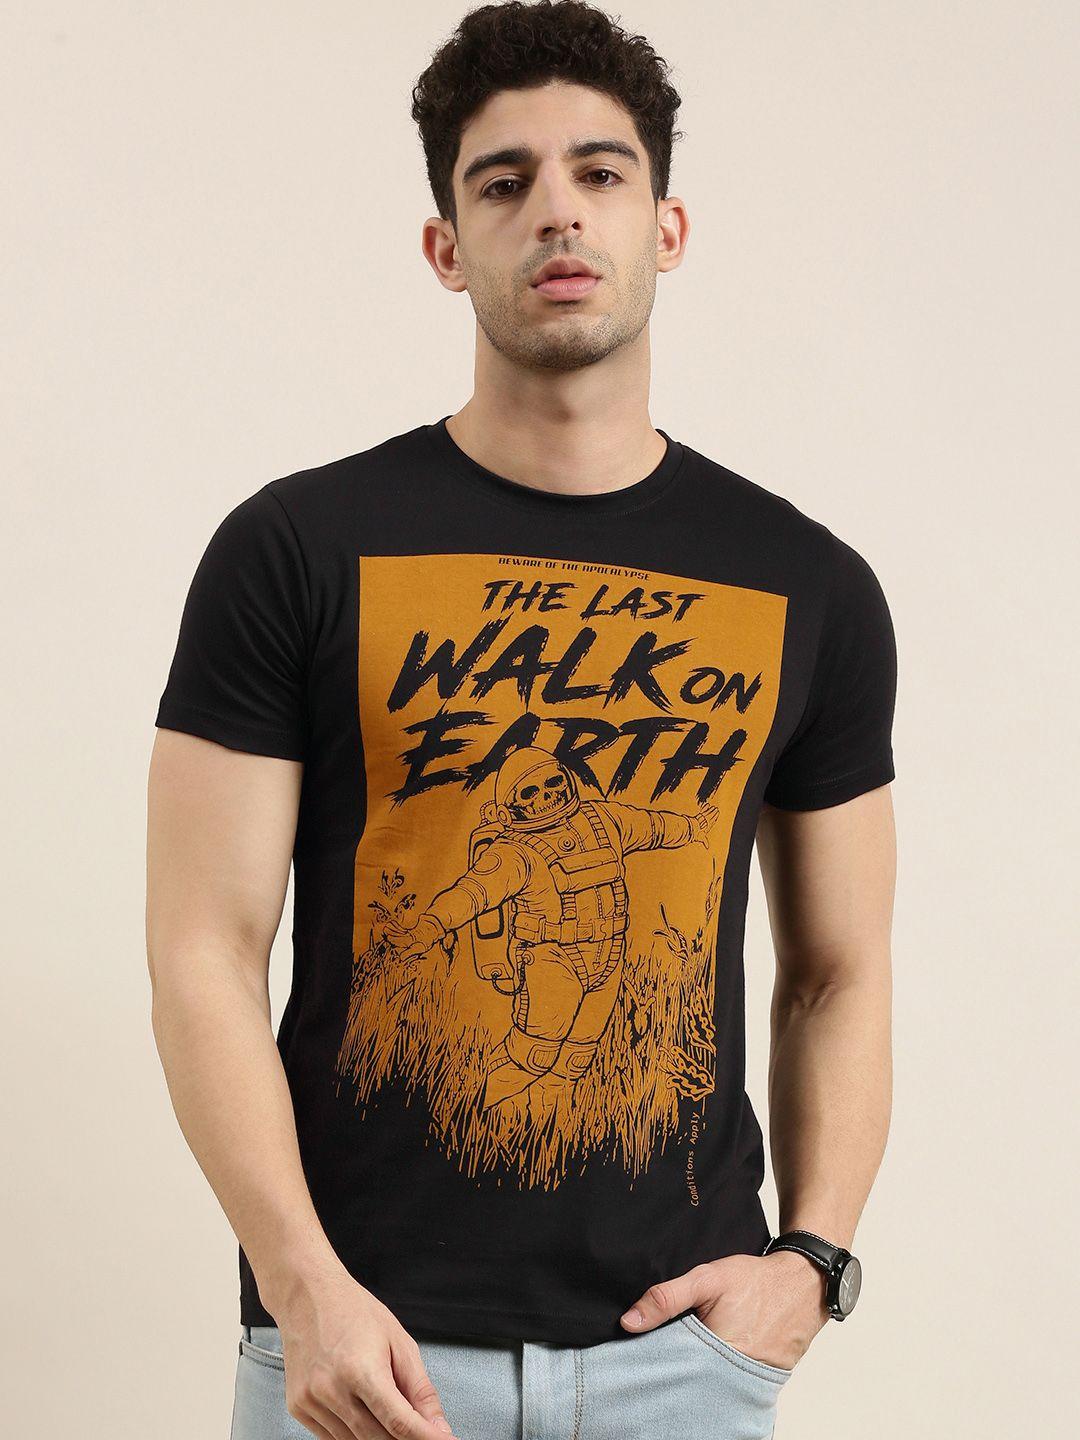 conditions-apply-men-black--mustard-yellow-printed-round-neck-pure-cotton-t-shirt